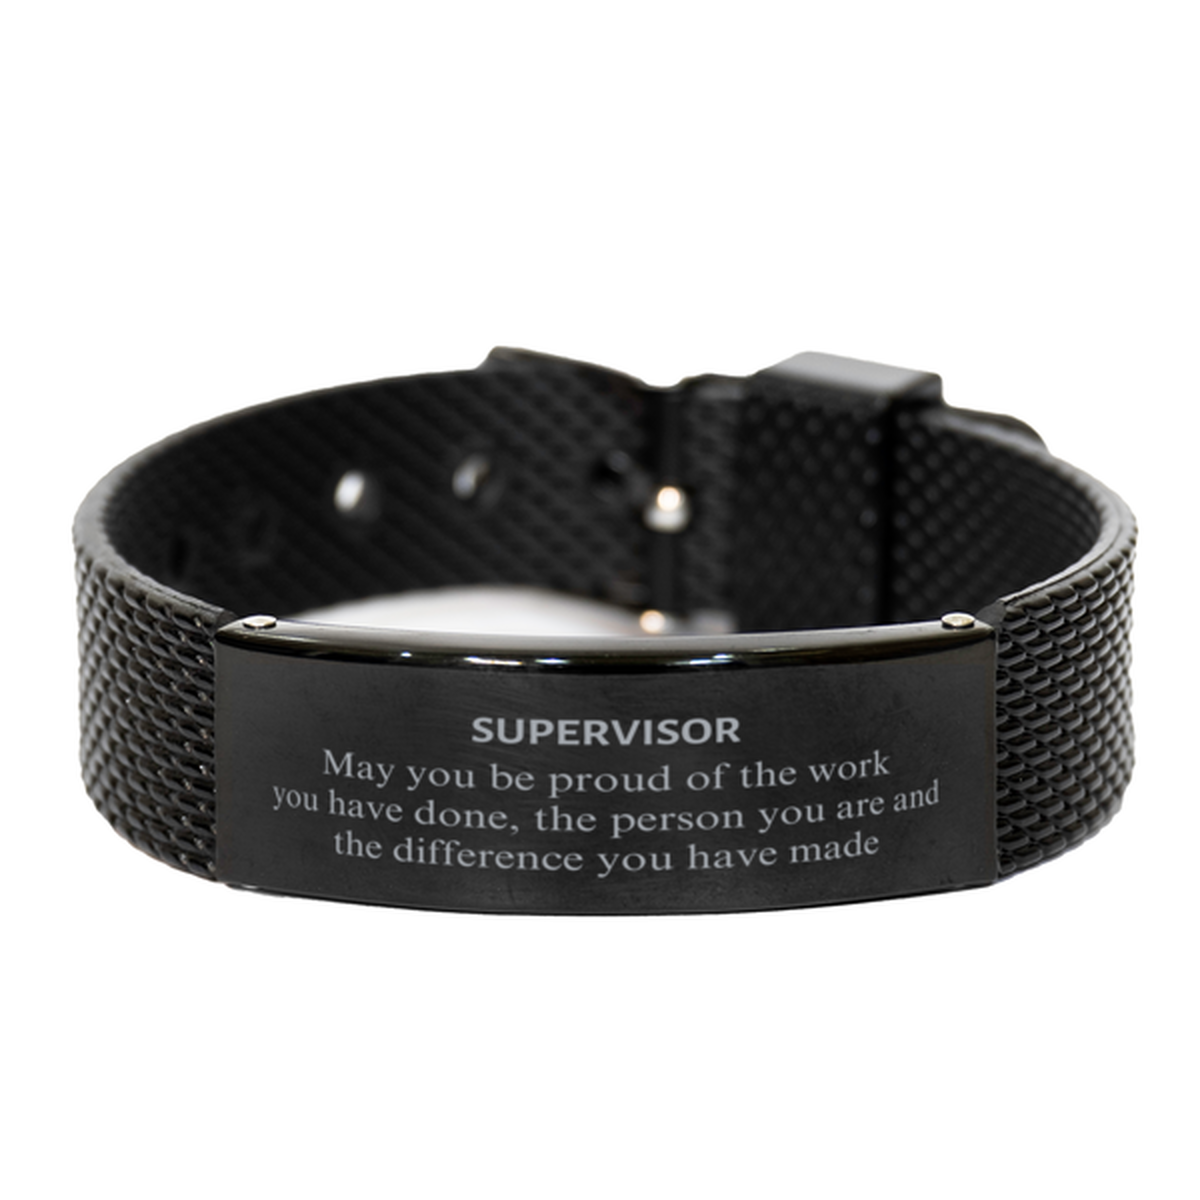 Supervisor May you be proud of the work you have done, Retirement Supervisor Black Shark Mesh Bracelet for Colleague Appreciation Gifts Amazing for Supervisor